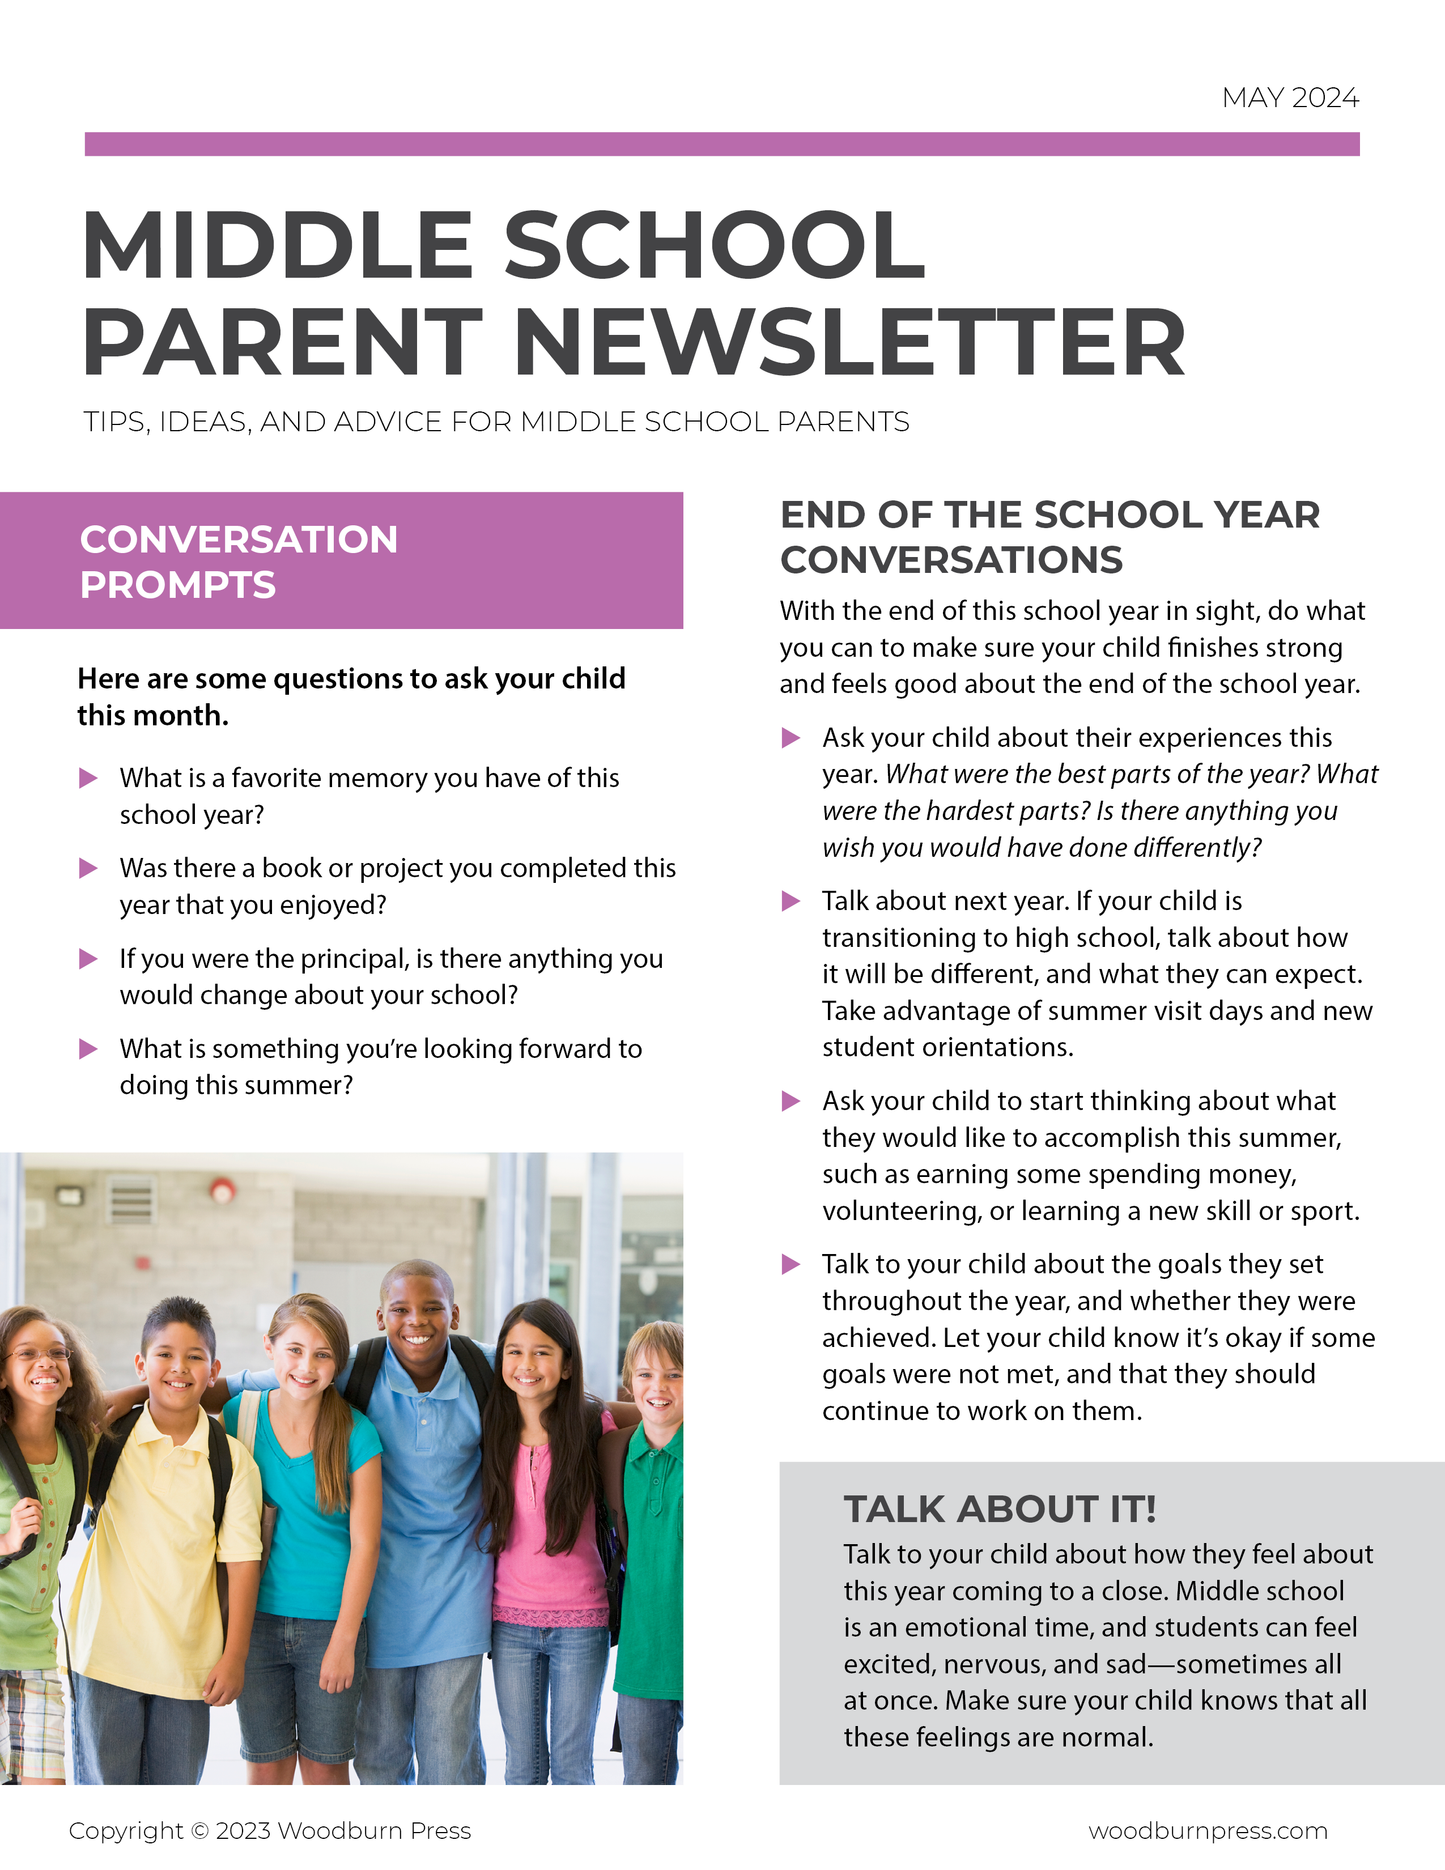 Middle School Parent Newsletter - May 2024